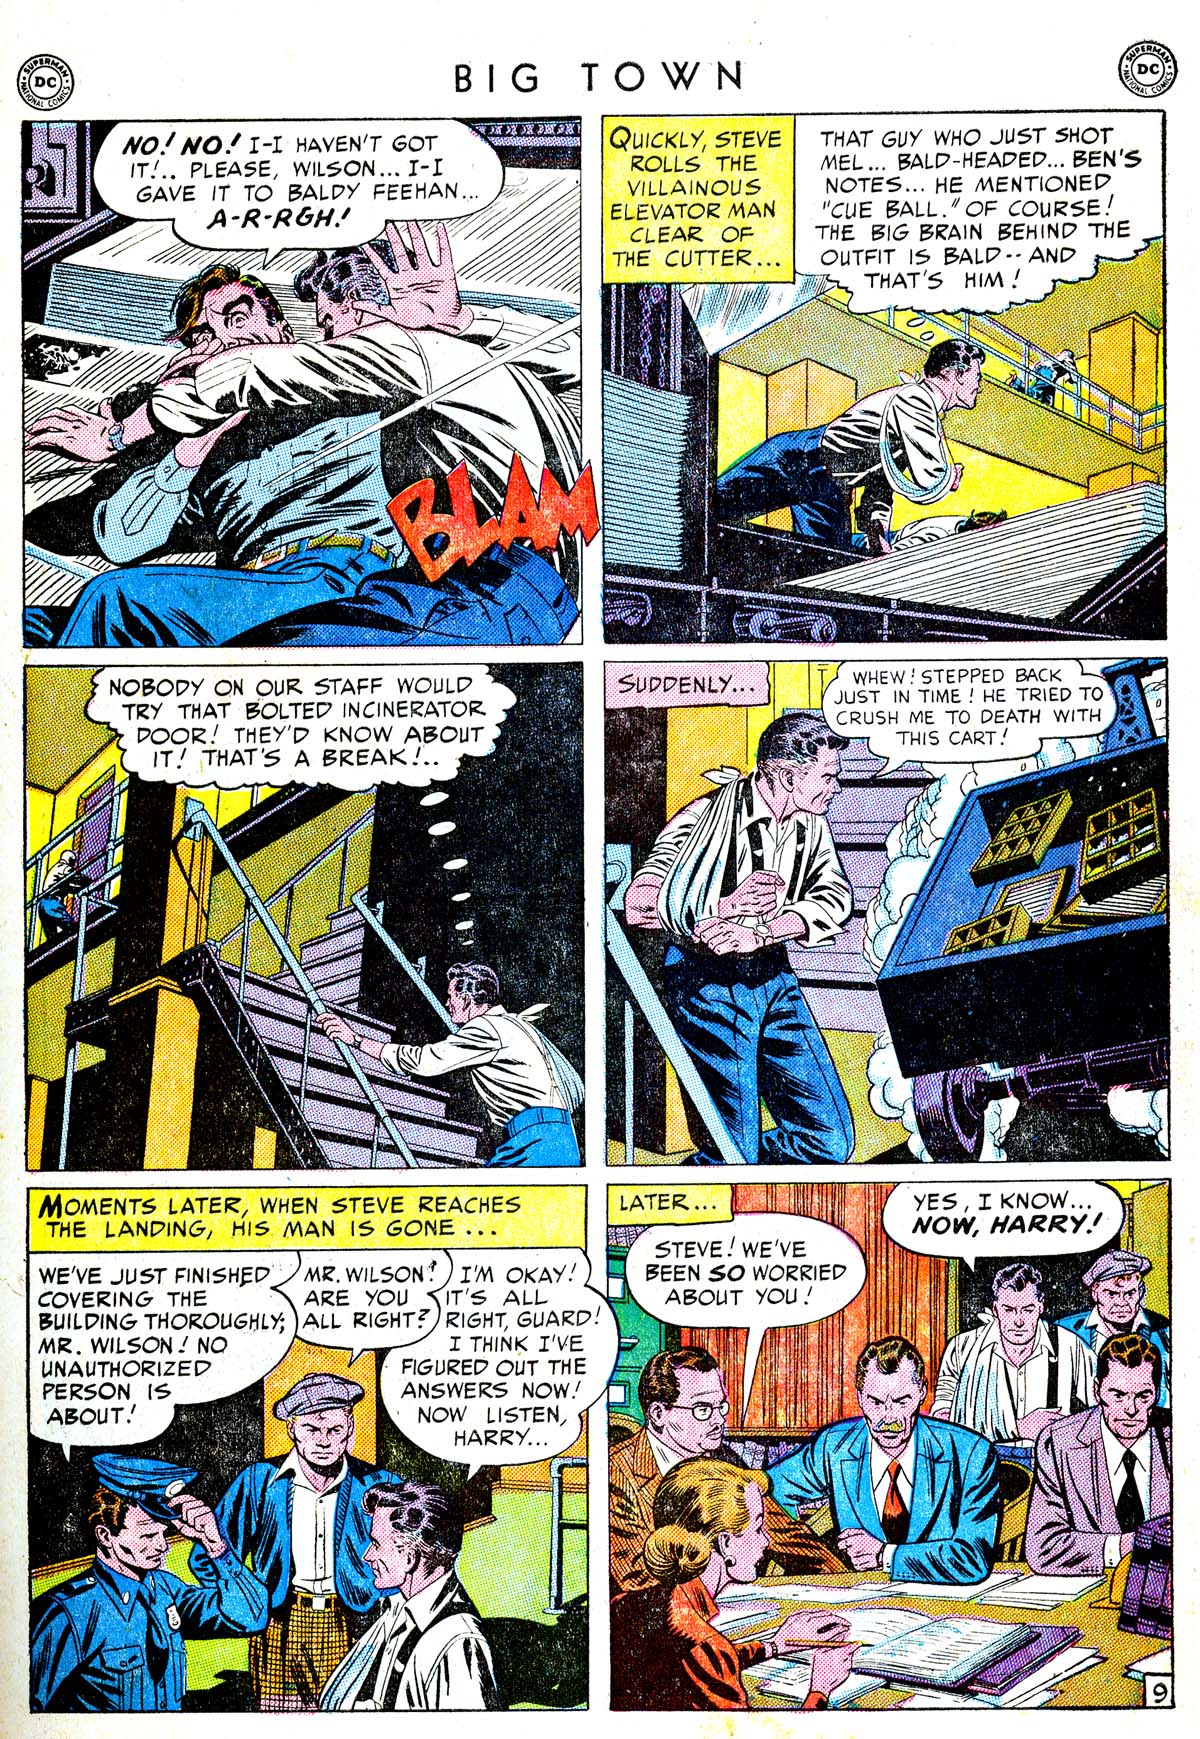 Big Town (1951) 1 Page 10